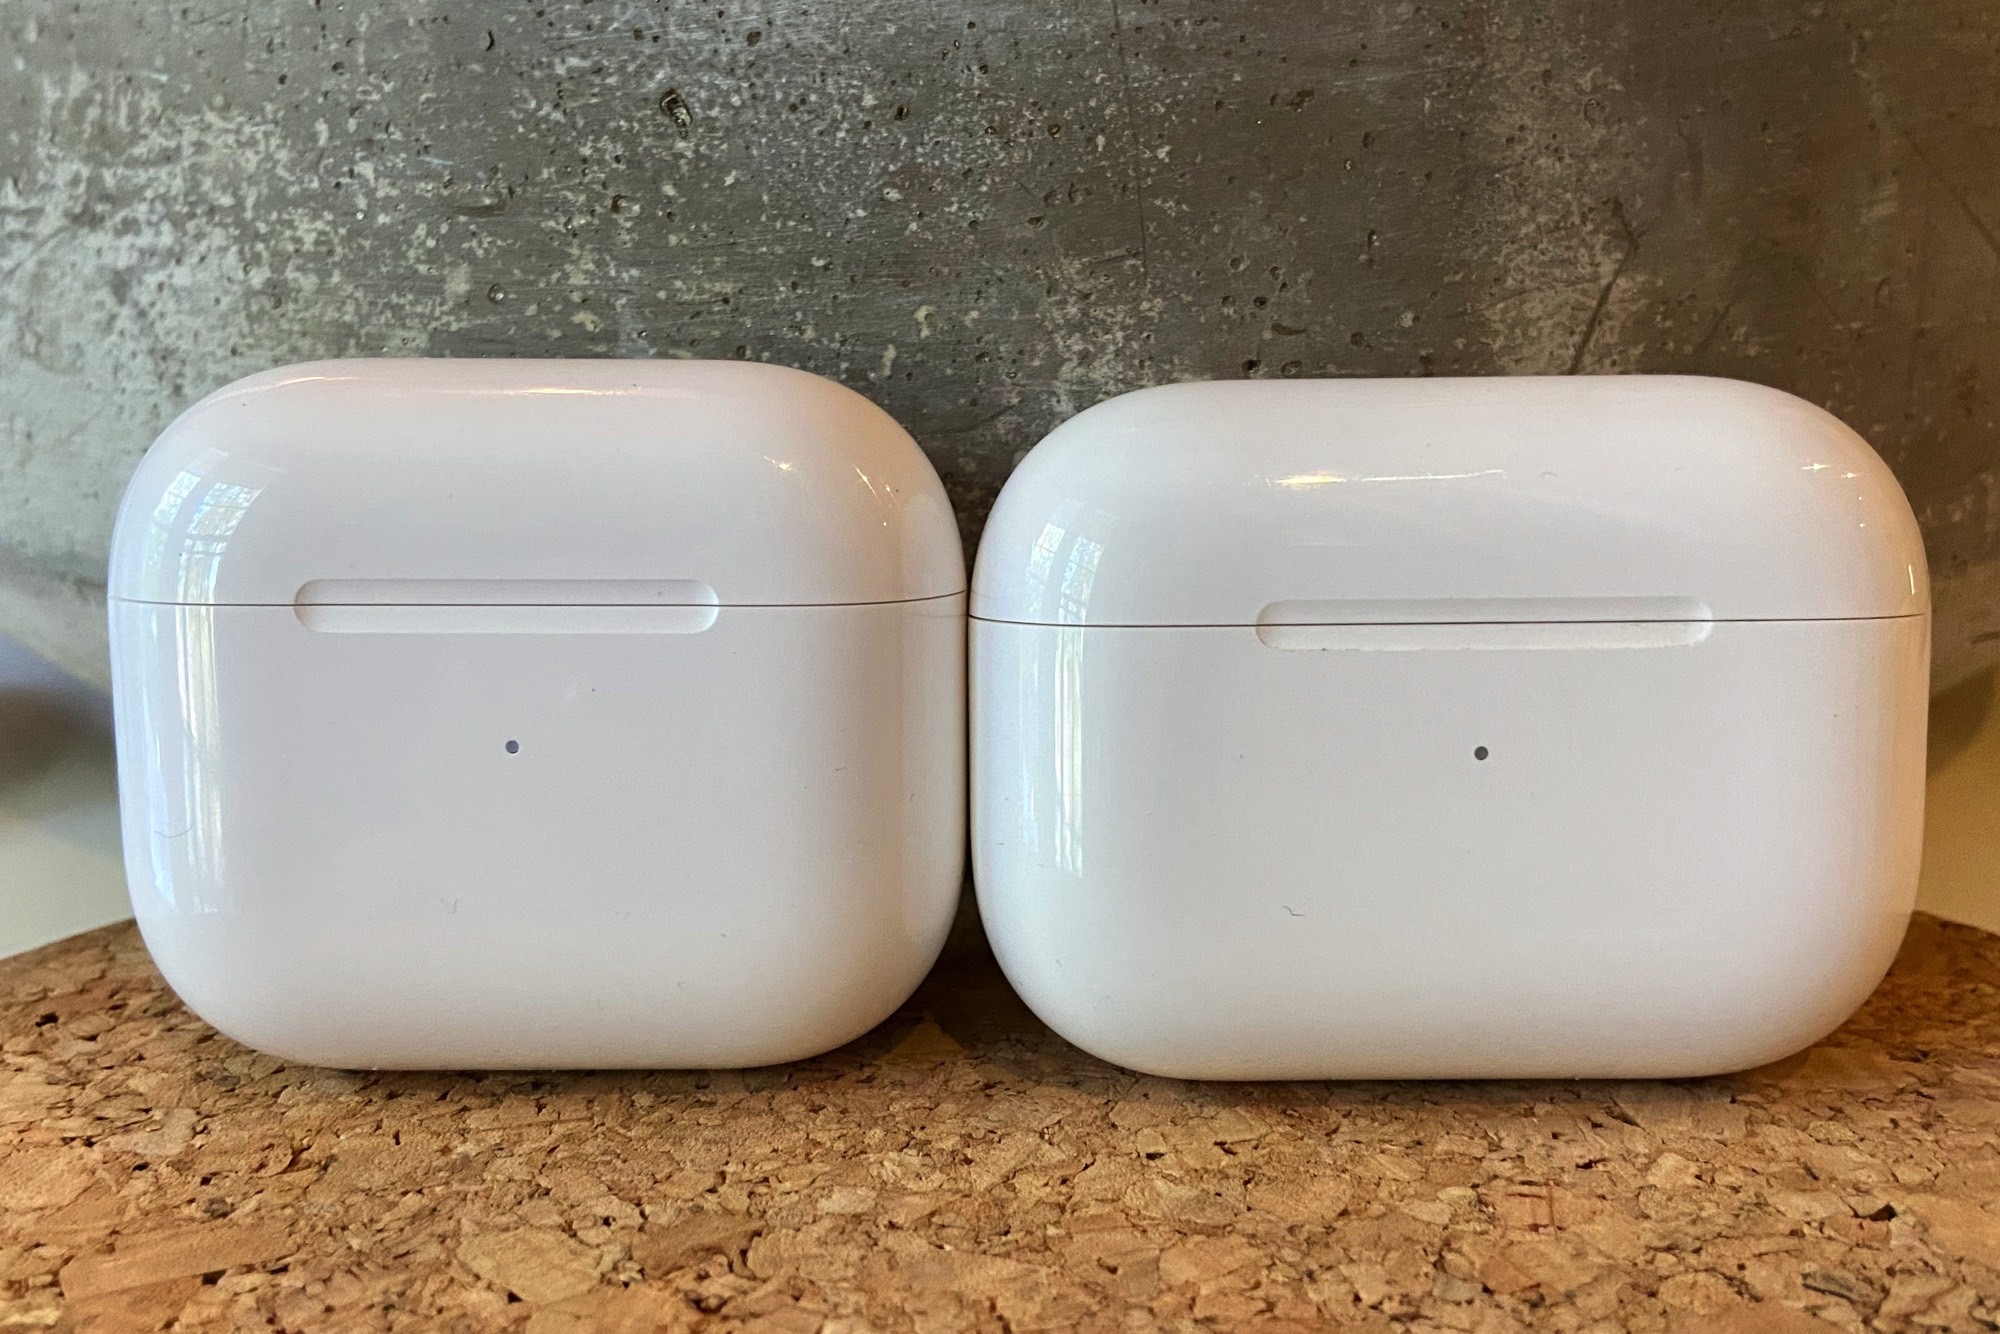 AirPods 3 and AirPods Pro charging cases.